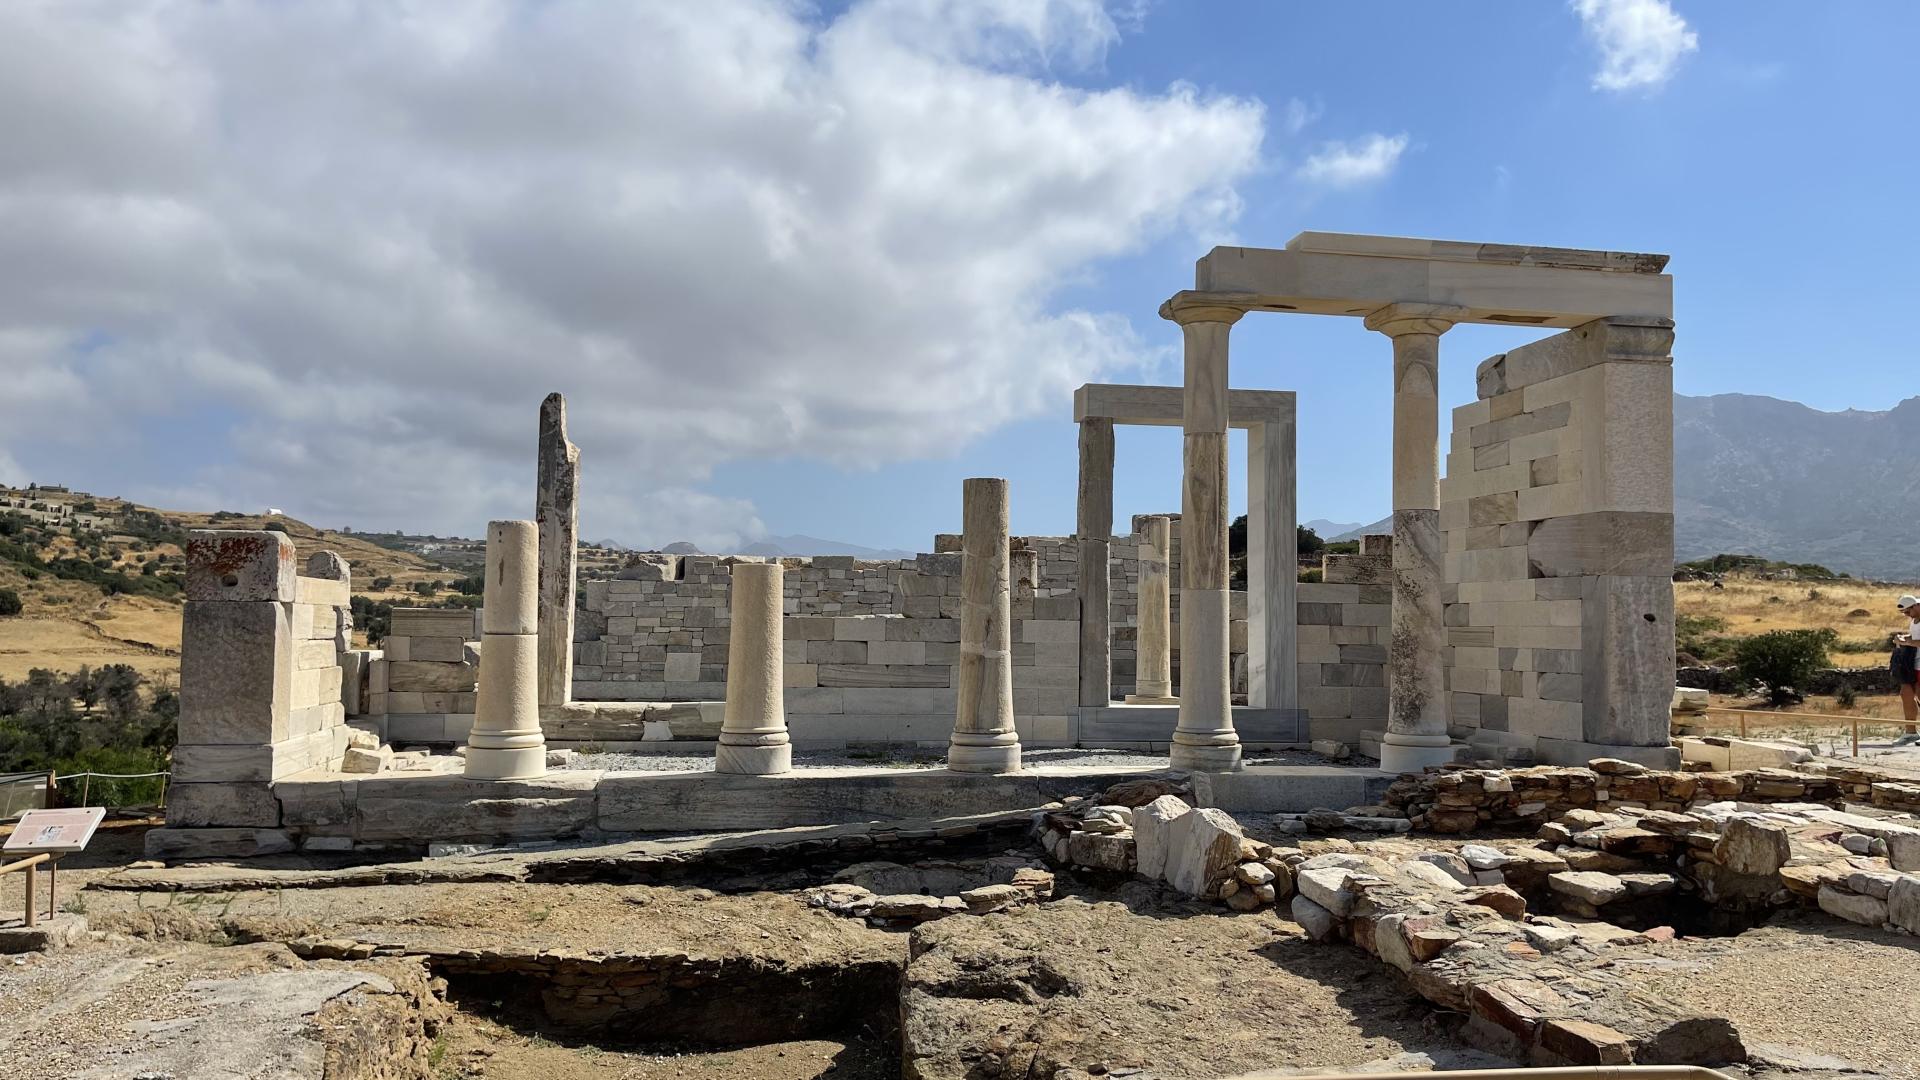 The Temple of Demeter on Naxos